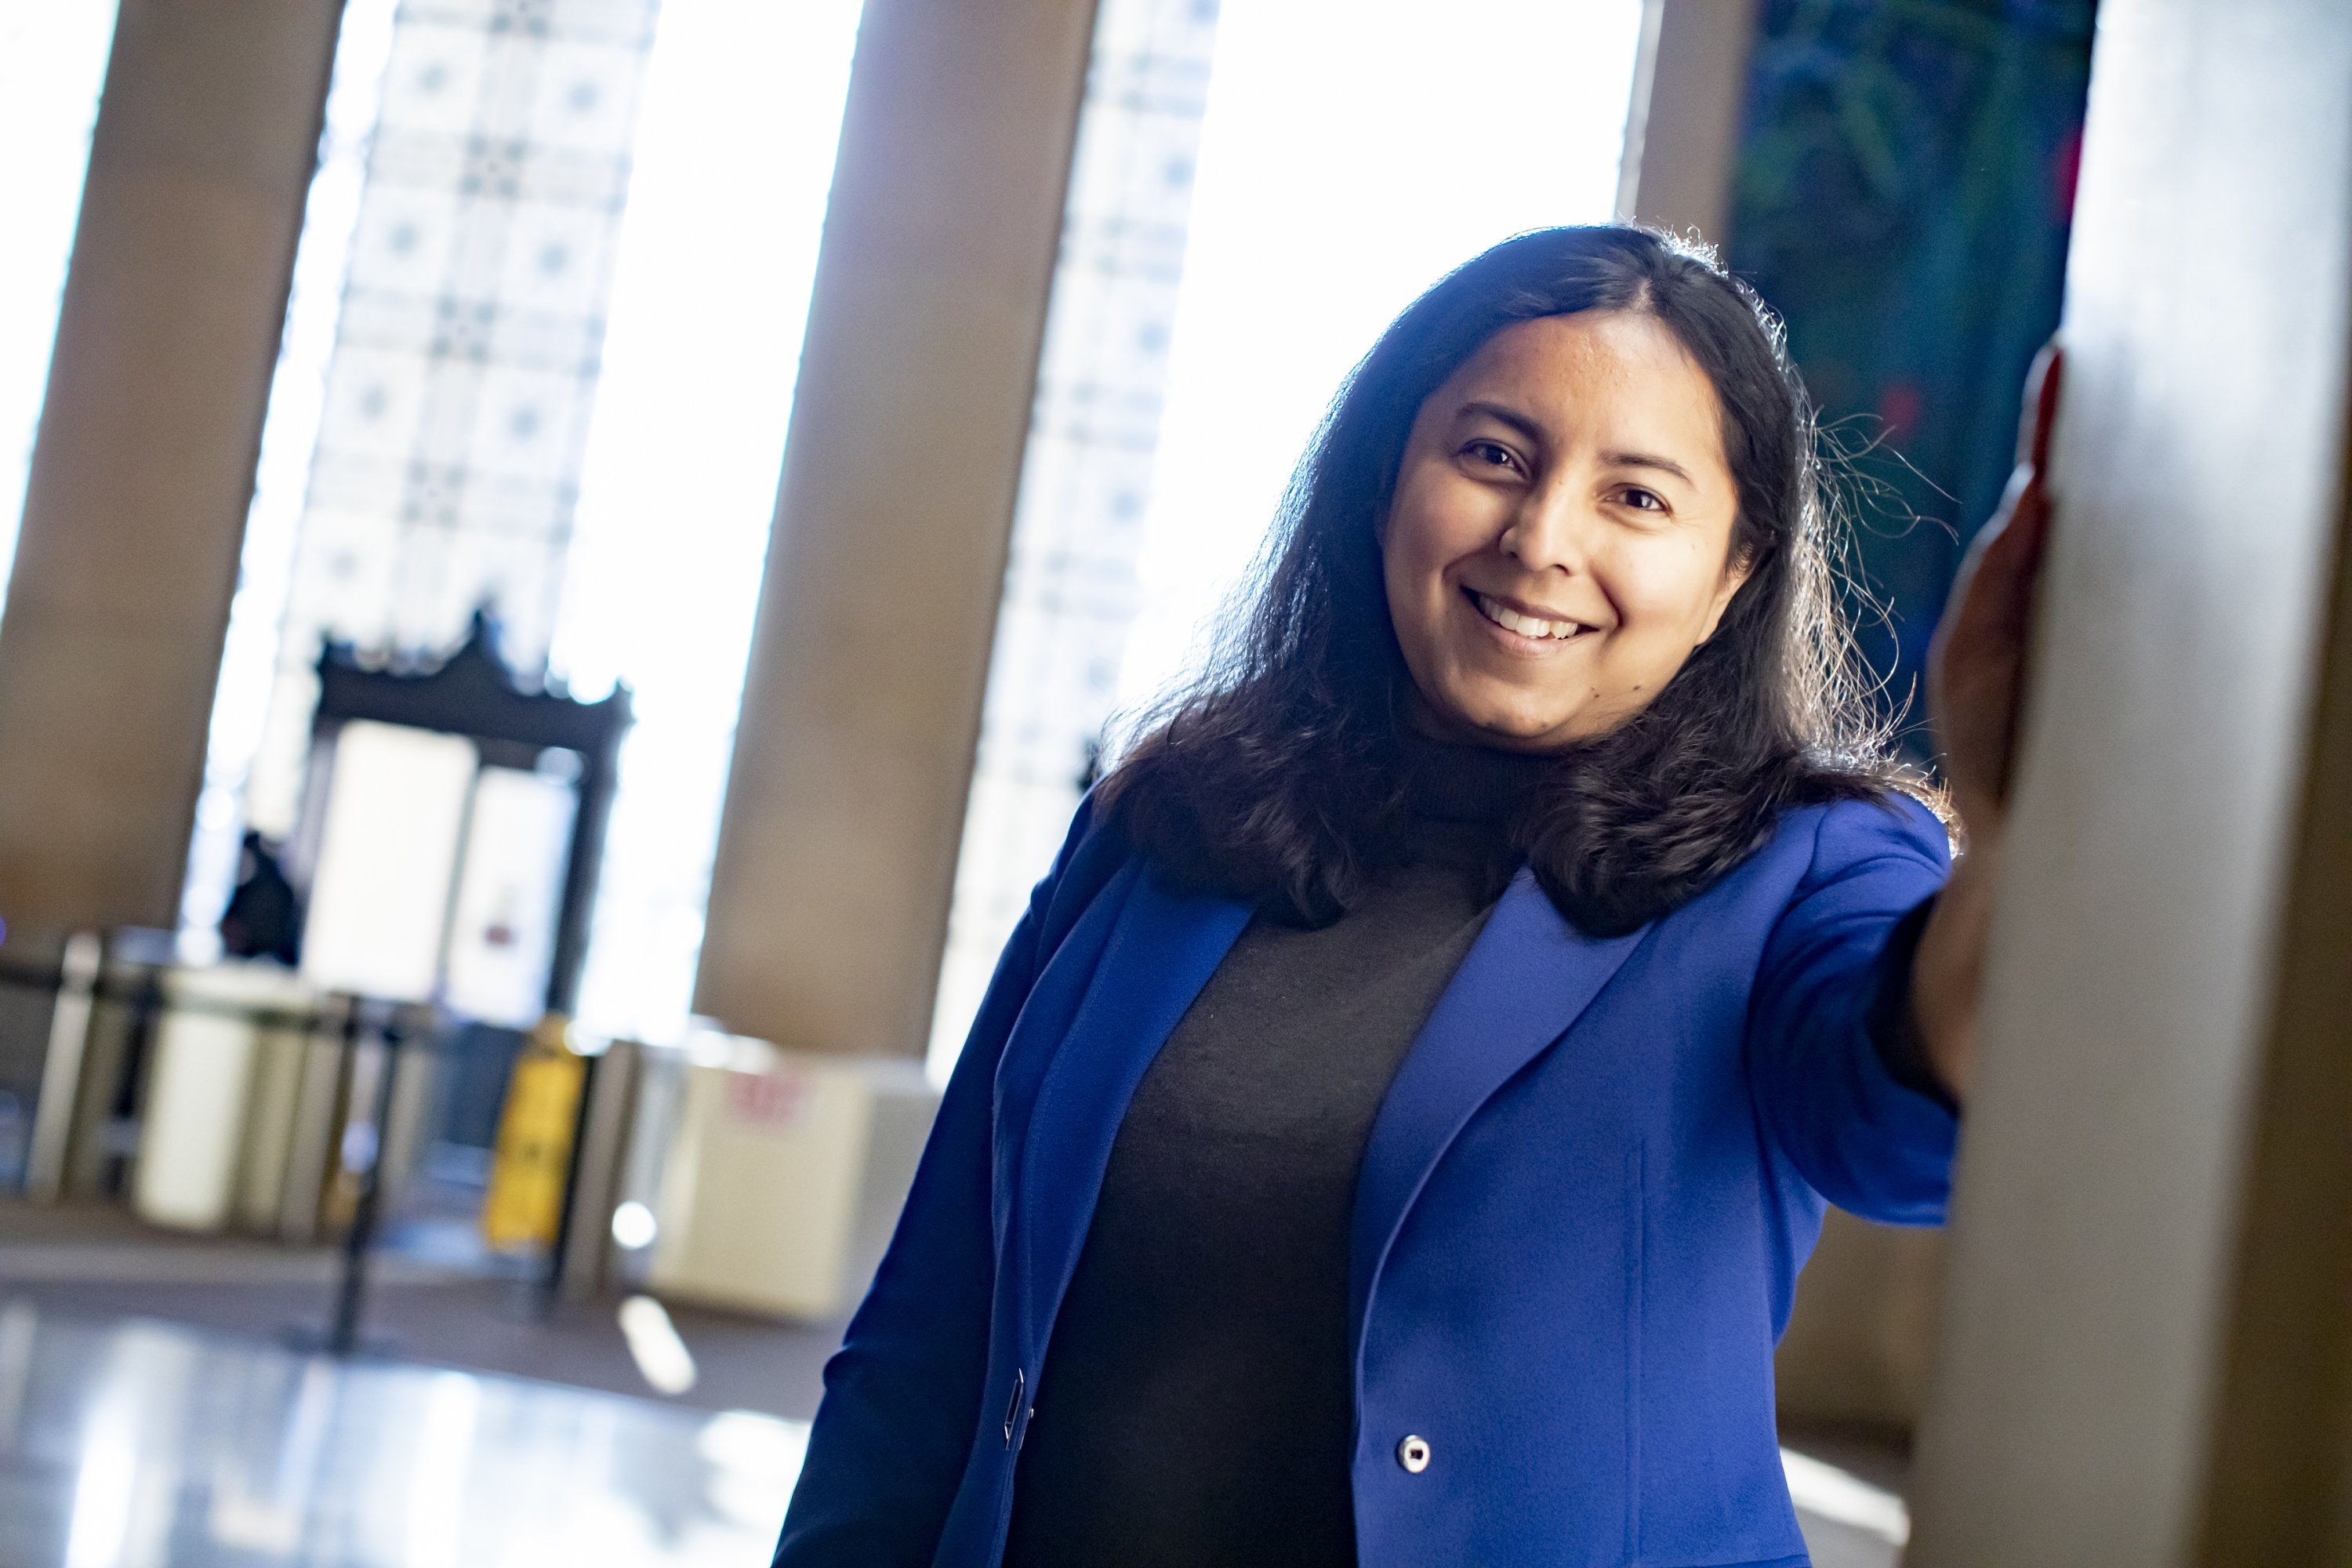 According to Kuheli Dutt, the best scientific research is — by necessity — the most diverse, accessible, and inclusive. In a new interview she also discusses what to watch out for, where MIT has excelled, and where it can improve.